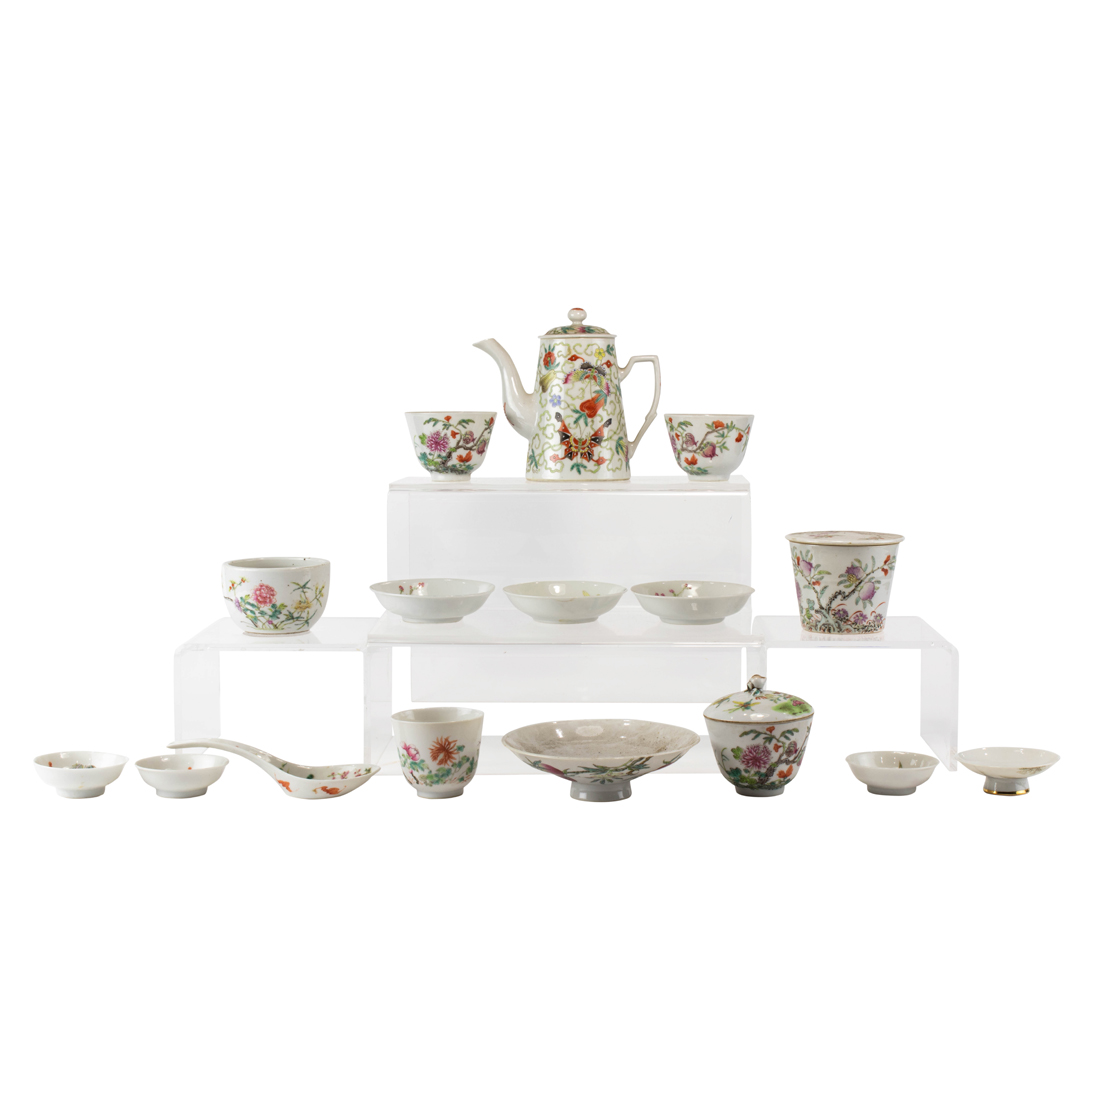 GROUP OF CHINESE FAMILLE ROSE PORCELAIN 2d1a3d